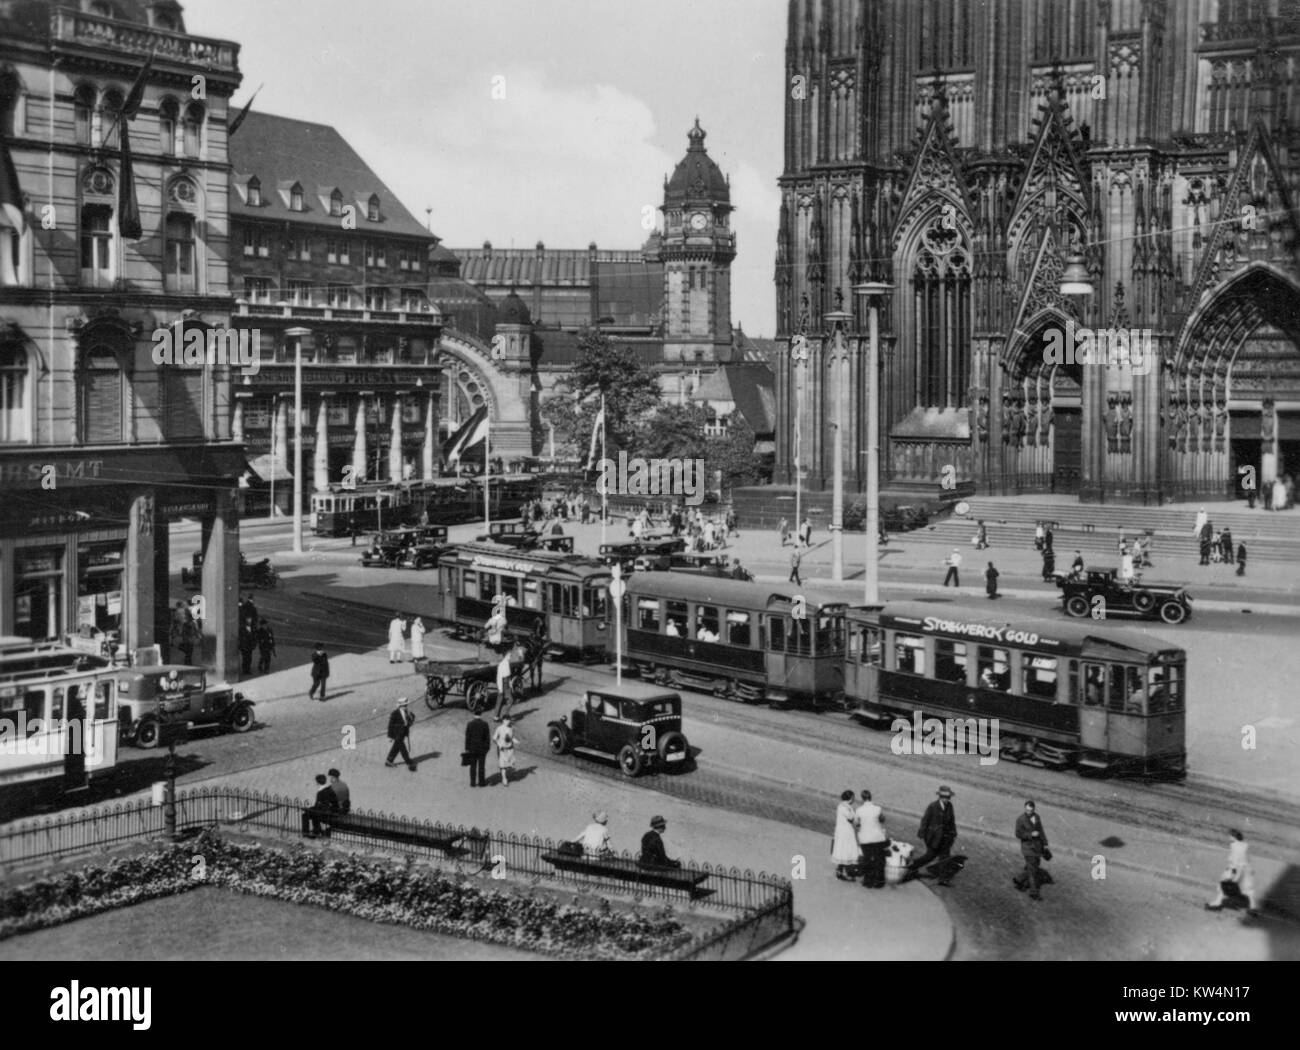 Street scene of train station and public square outside the Cologne Cathedral in Cologne, Germany, 1950. Stock Photo